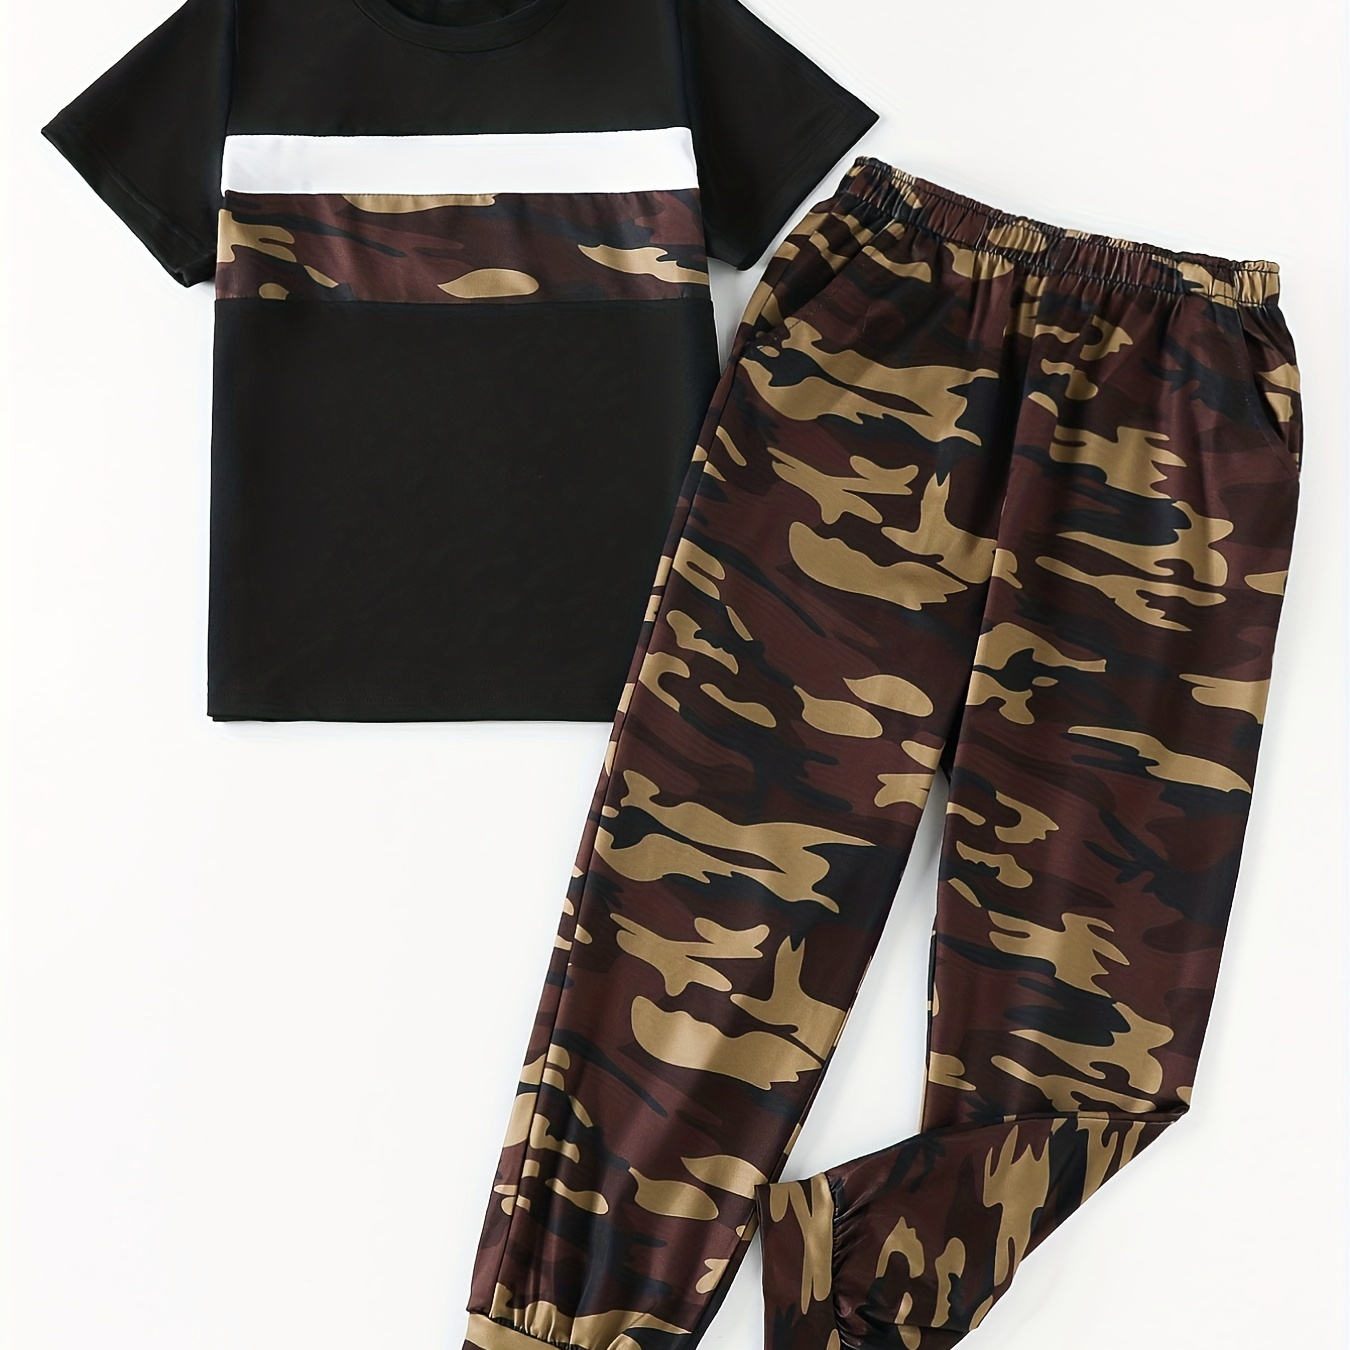 

Boy's Camouflage Stitching T-shirt & Sport Shorts Set, Casual Comfortable Short Sleeve Top And Pants For Summer Kids